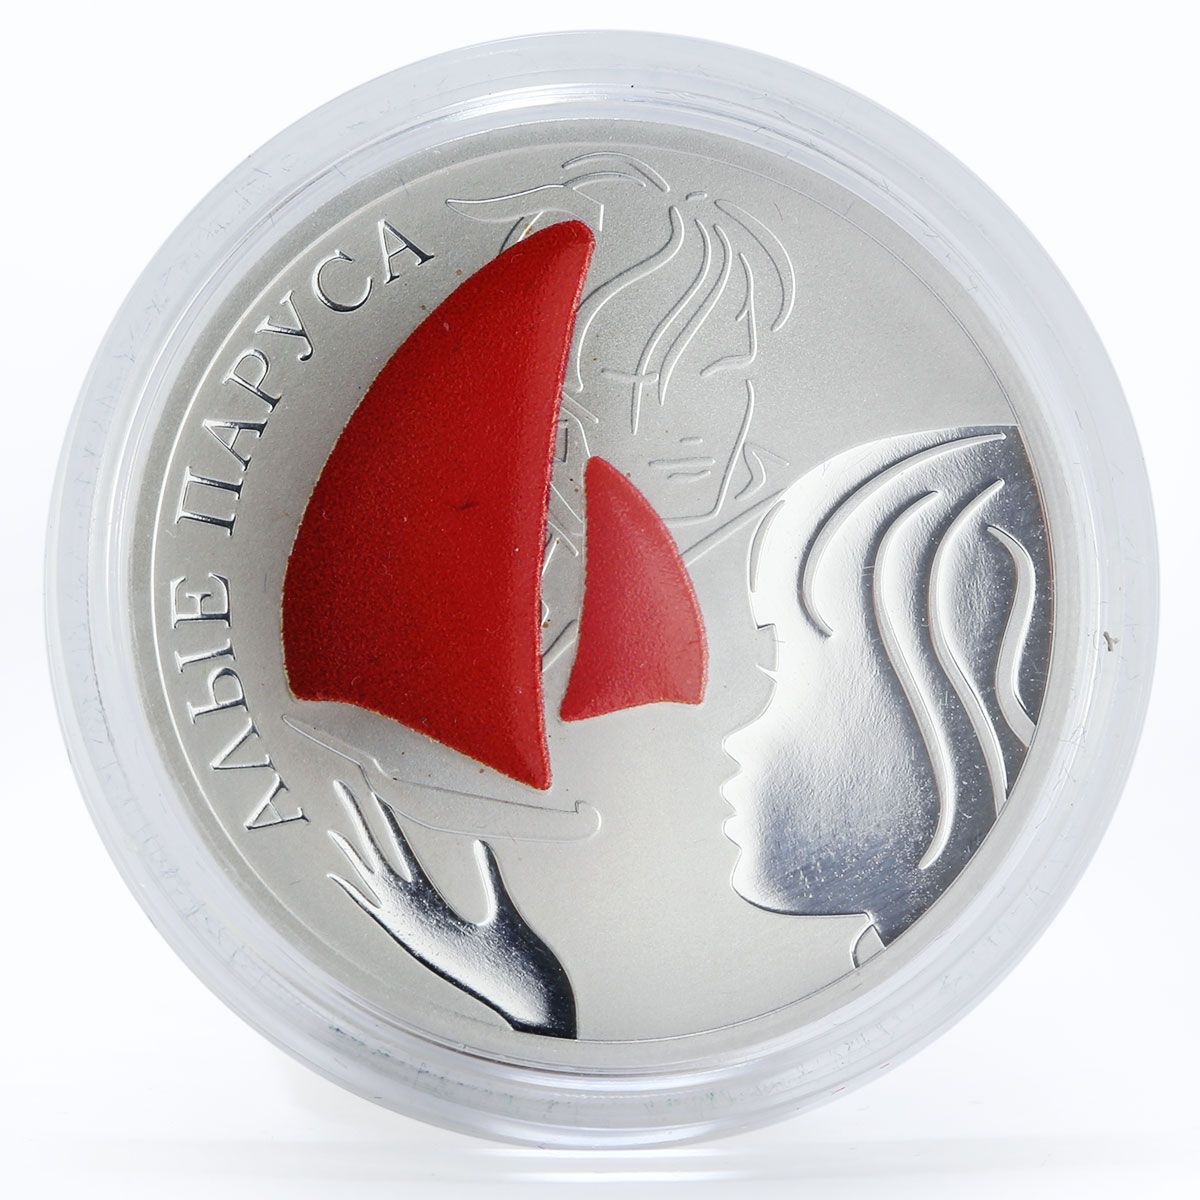 Cameroon 500 francs Scarlet Sails love ship colored proof silver coin 2019